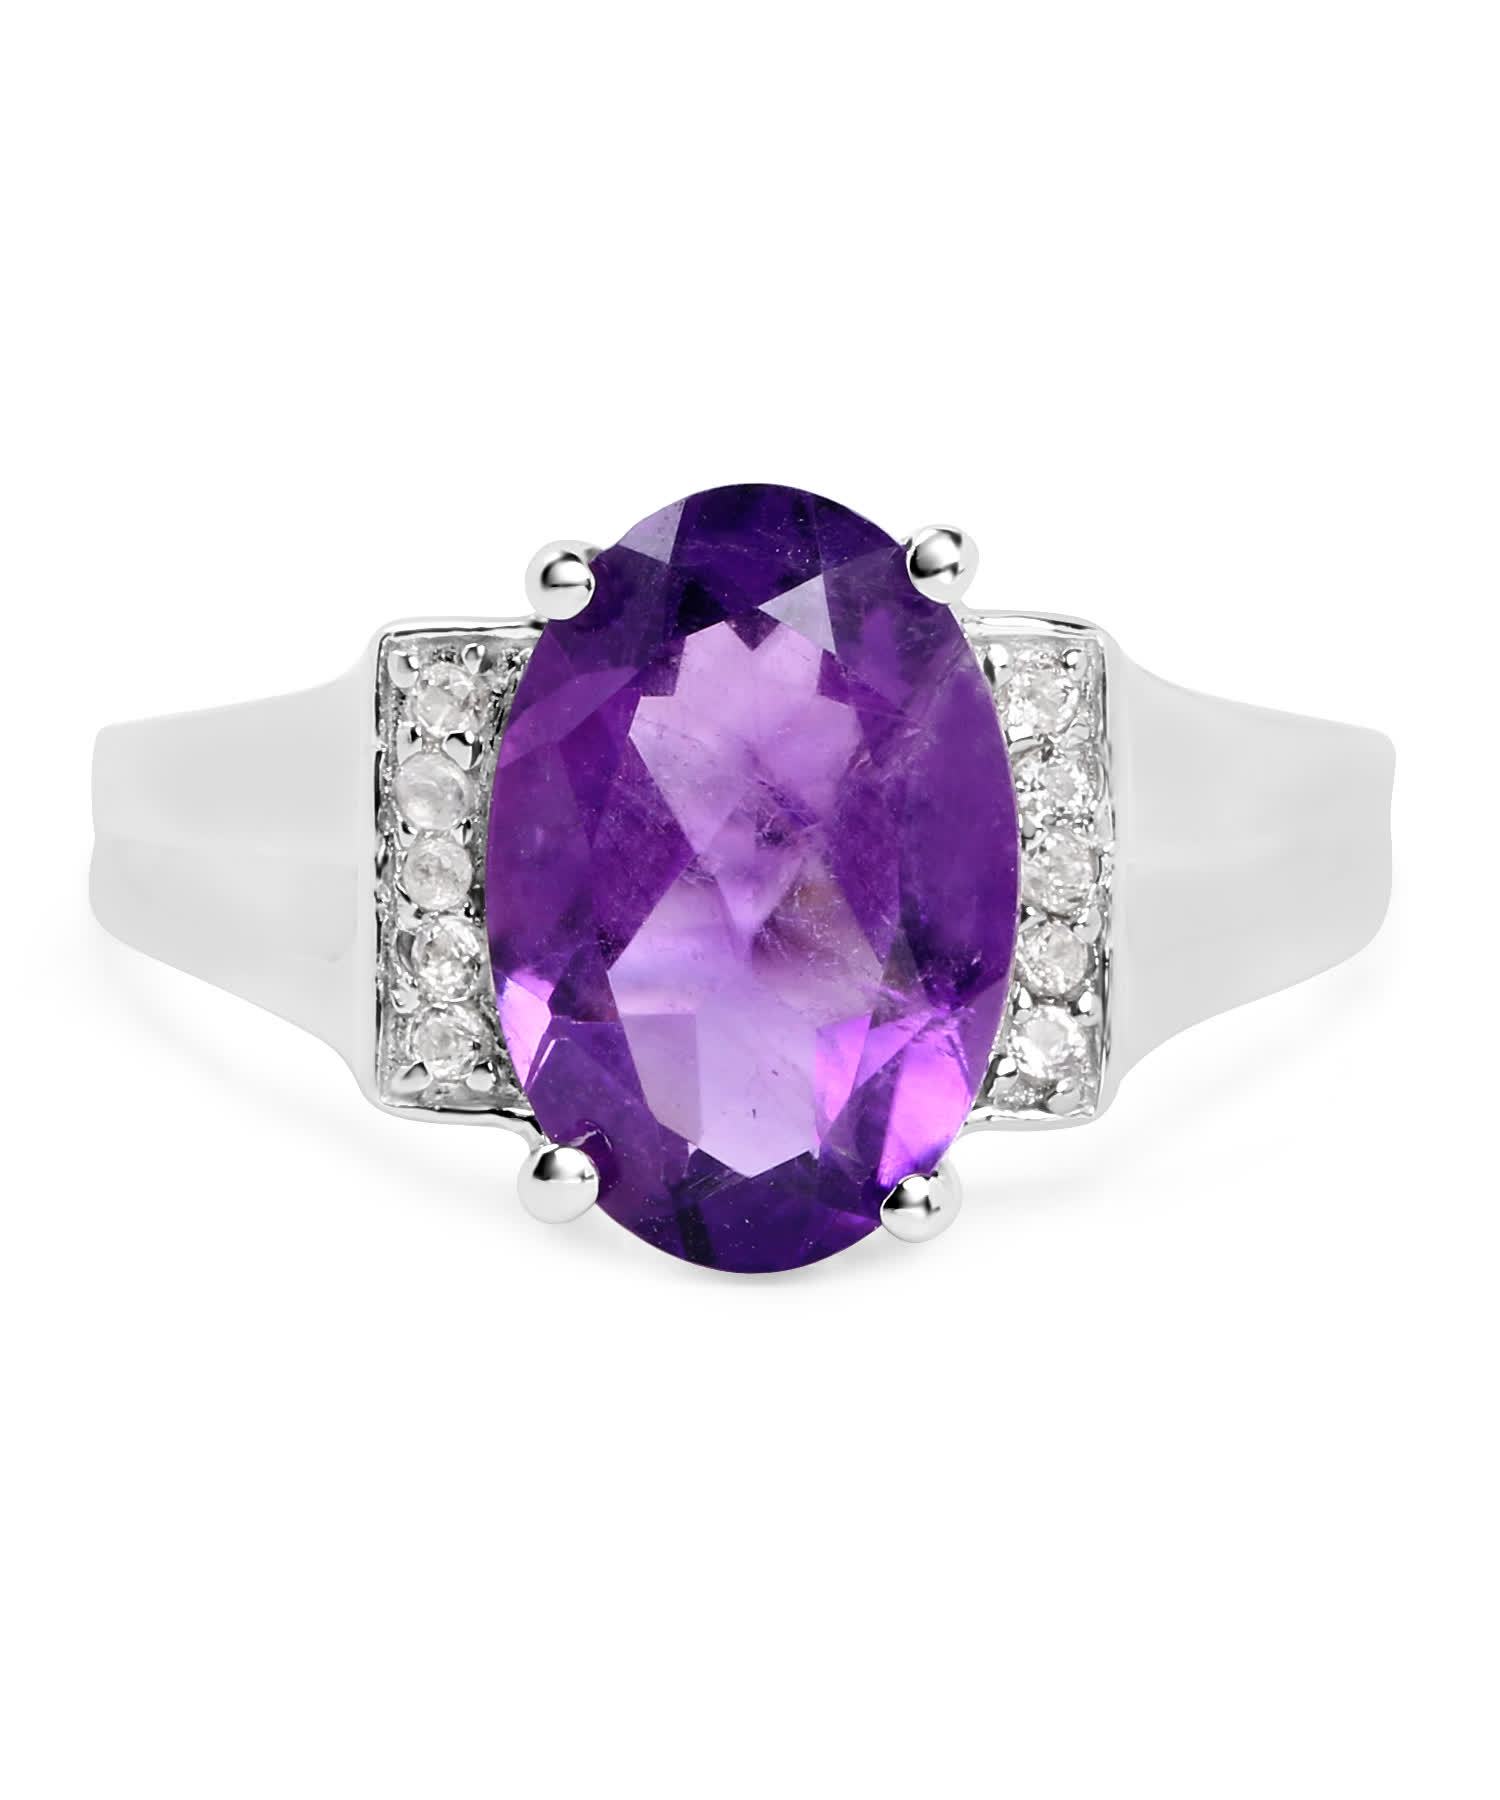 3.12ctw Natural Amethyst and Topaz Rhodium Plated 925 Sterling Silver Ring View 3